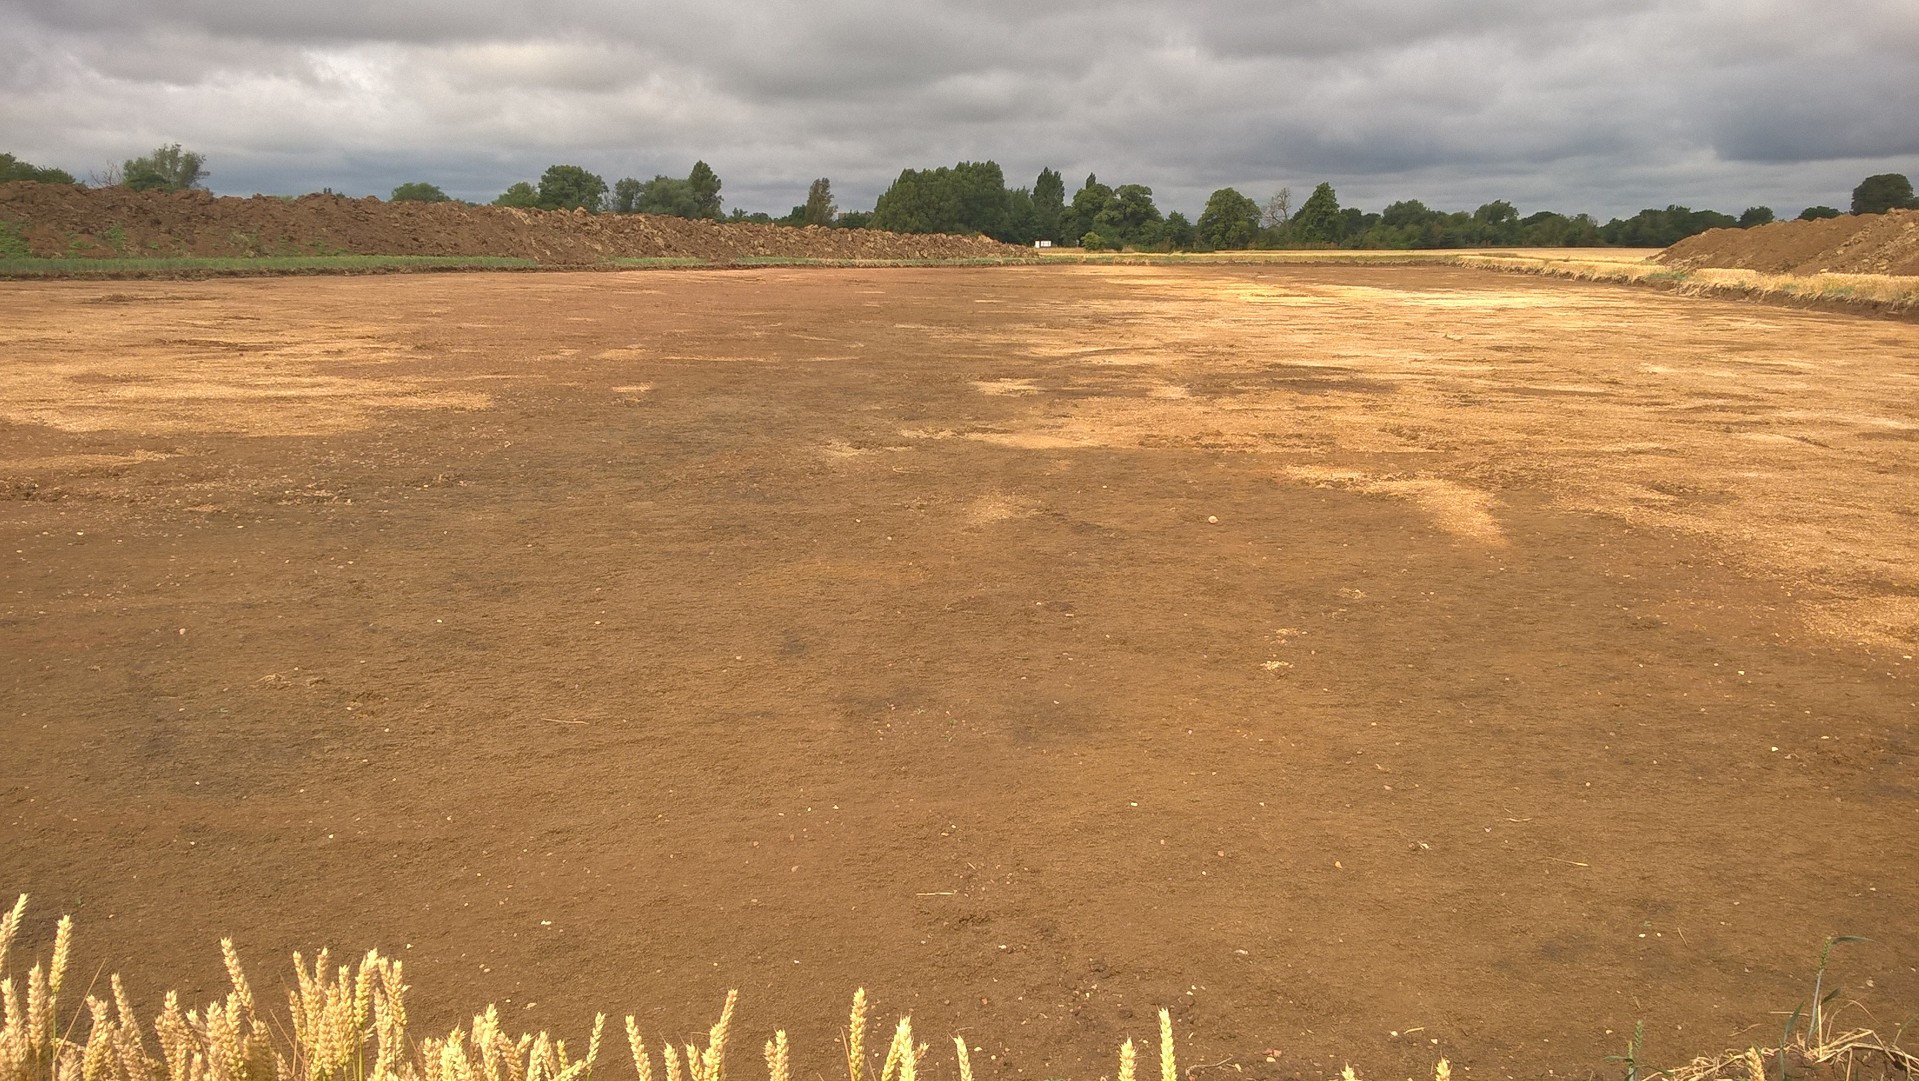 Site Preparatory Works at Sutton Courtenay Quarry in Oxfordshire